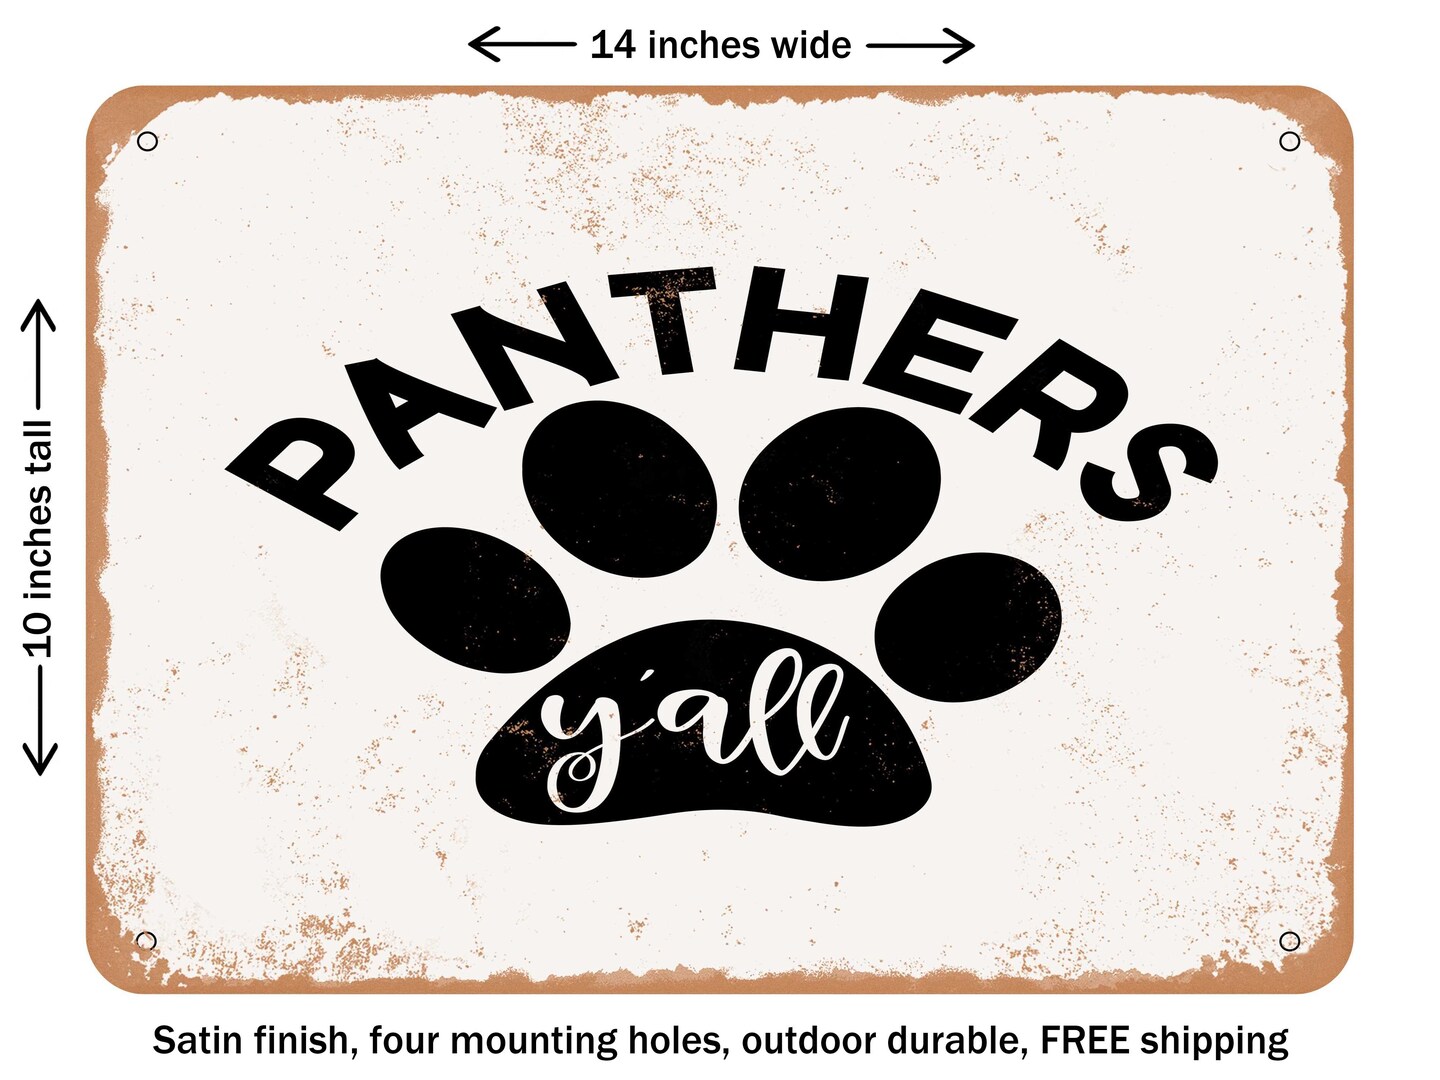 DECORATIVE METAL SIGN - Panthers Y&#x27;all - Vintage Rusty Look